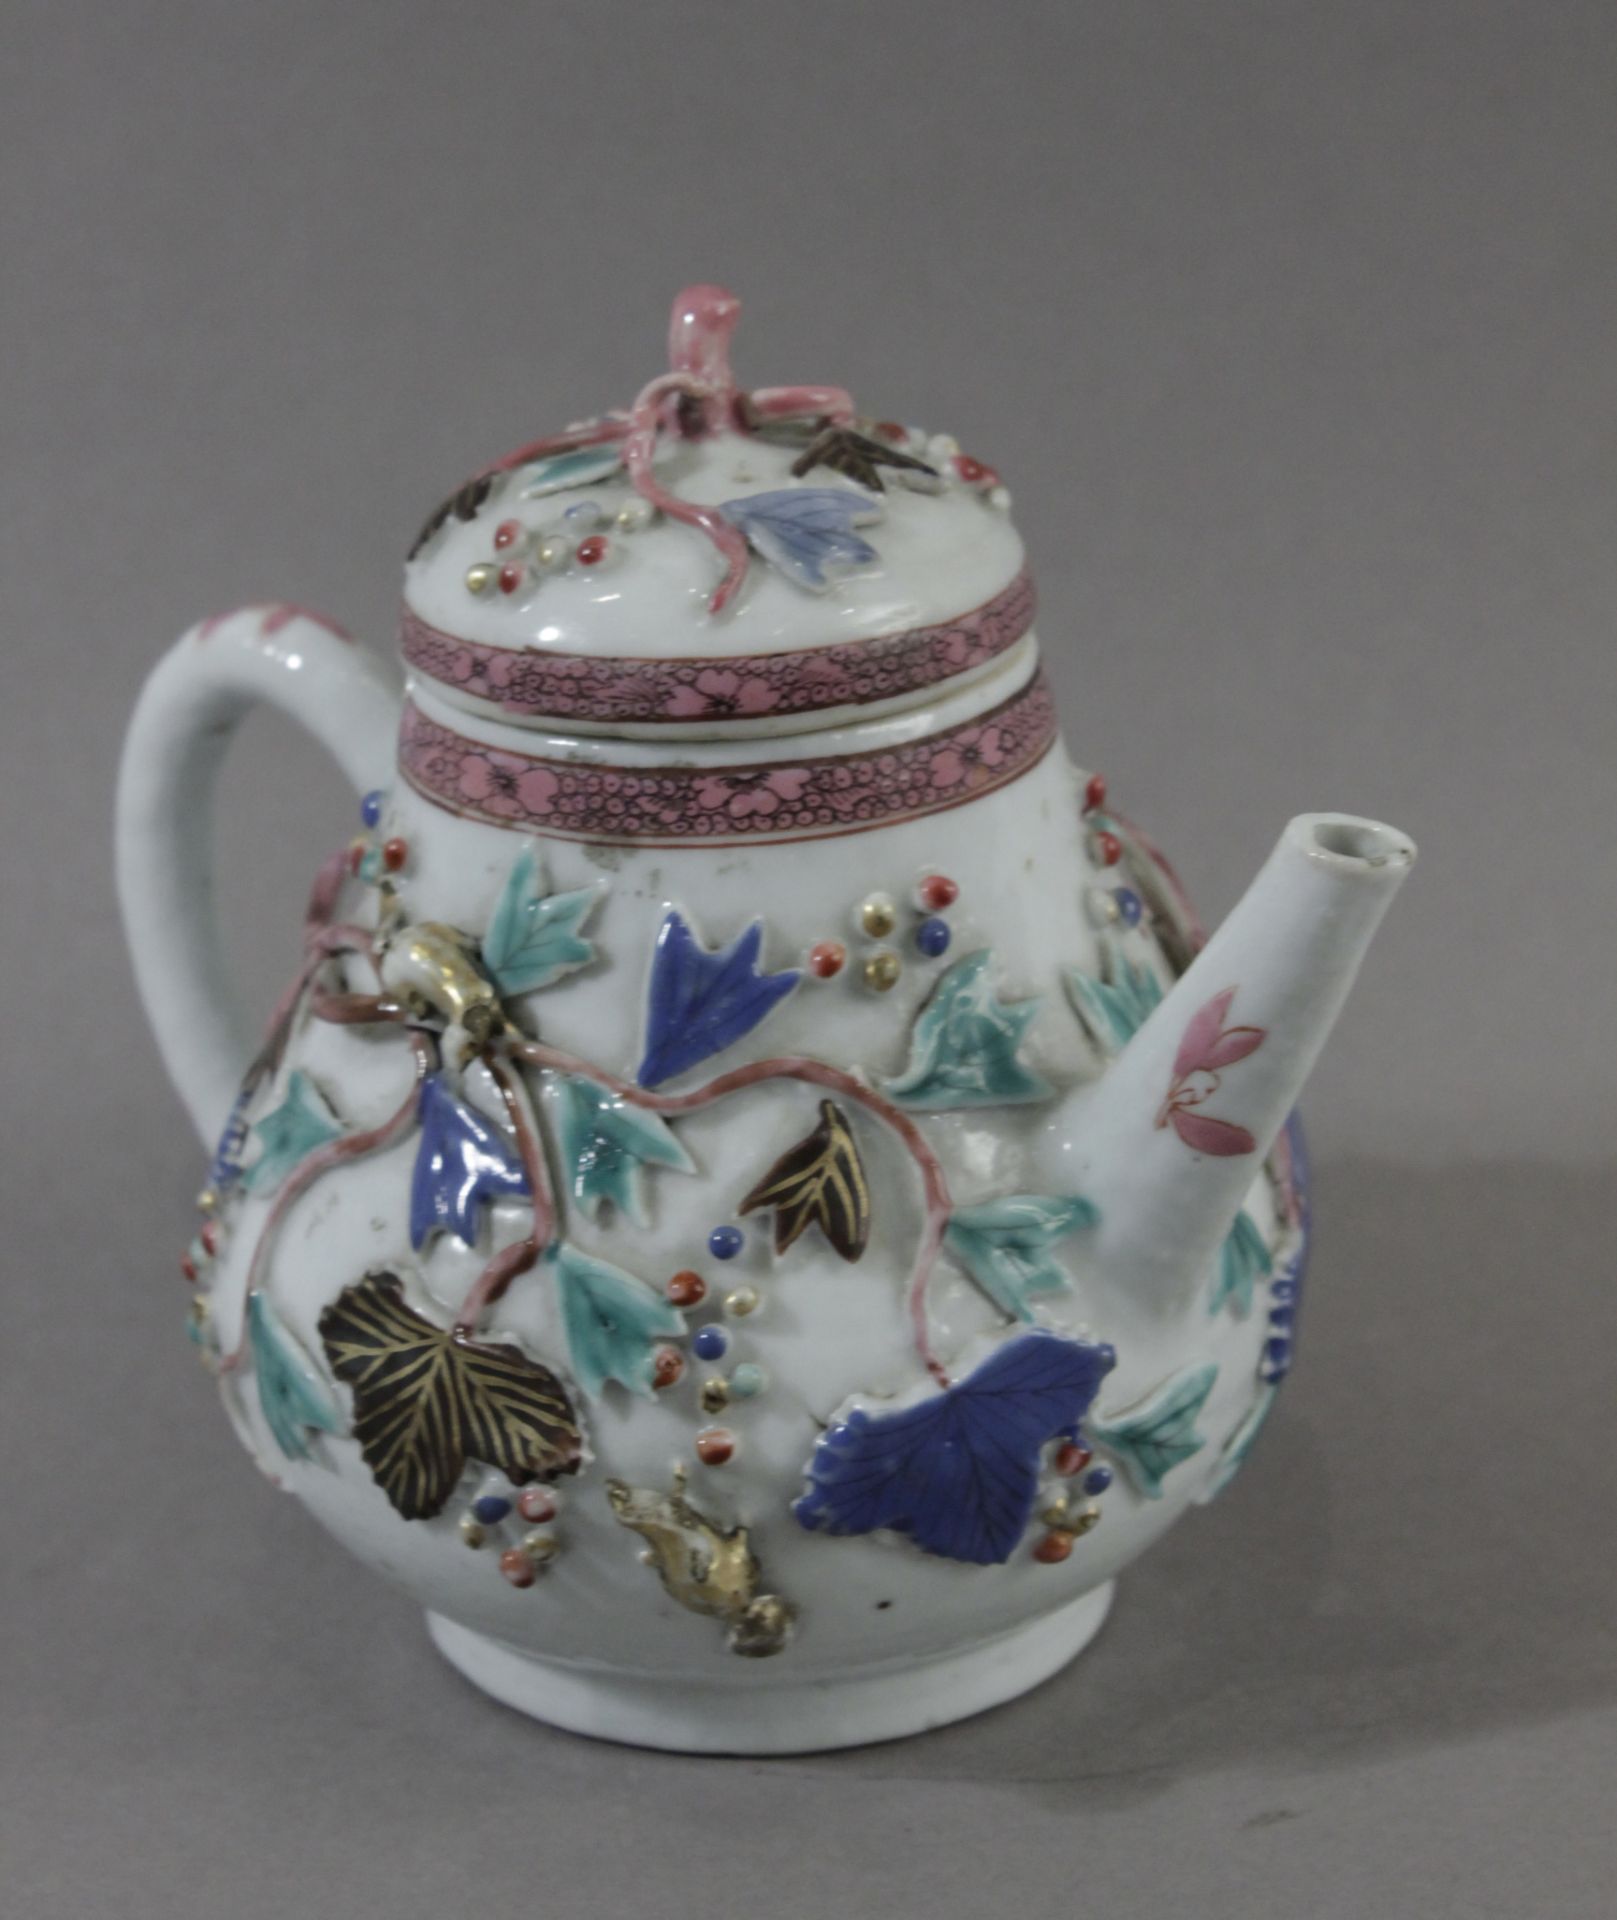 An 18th century Chiense porcelain teapot from Yongzheng period - Image 2 of 5